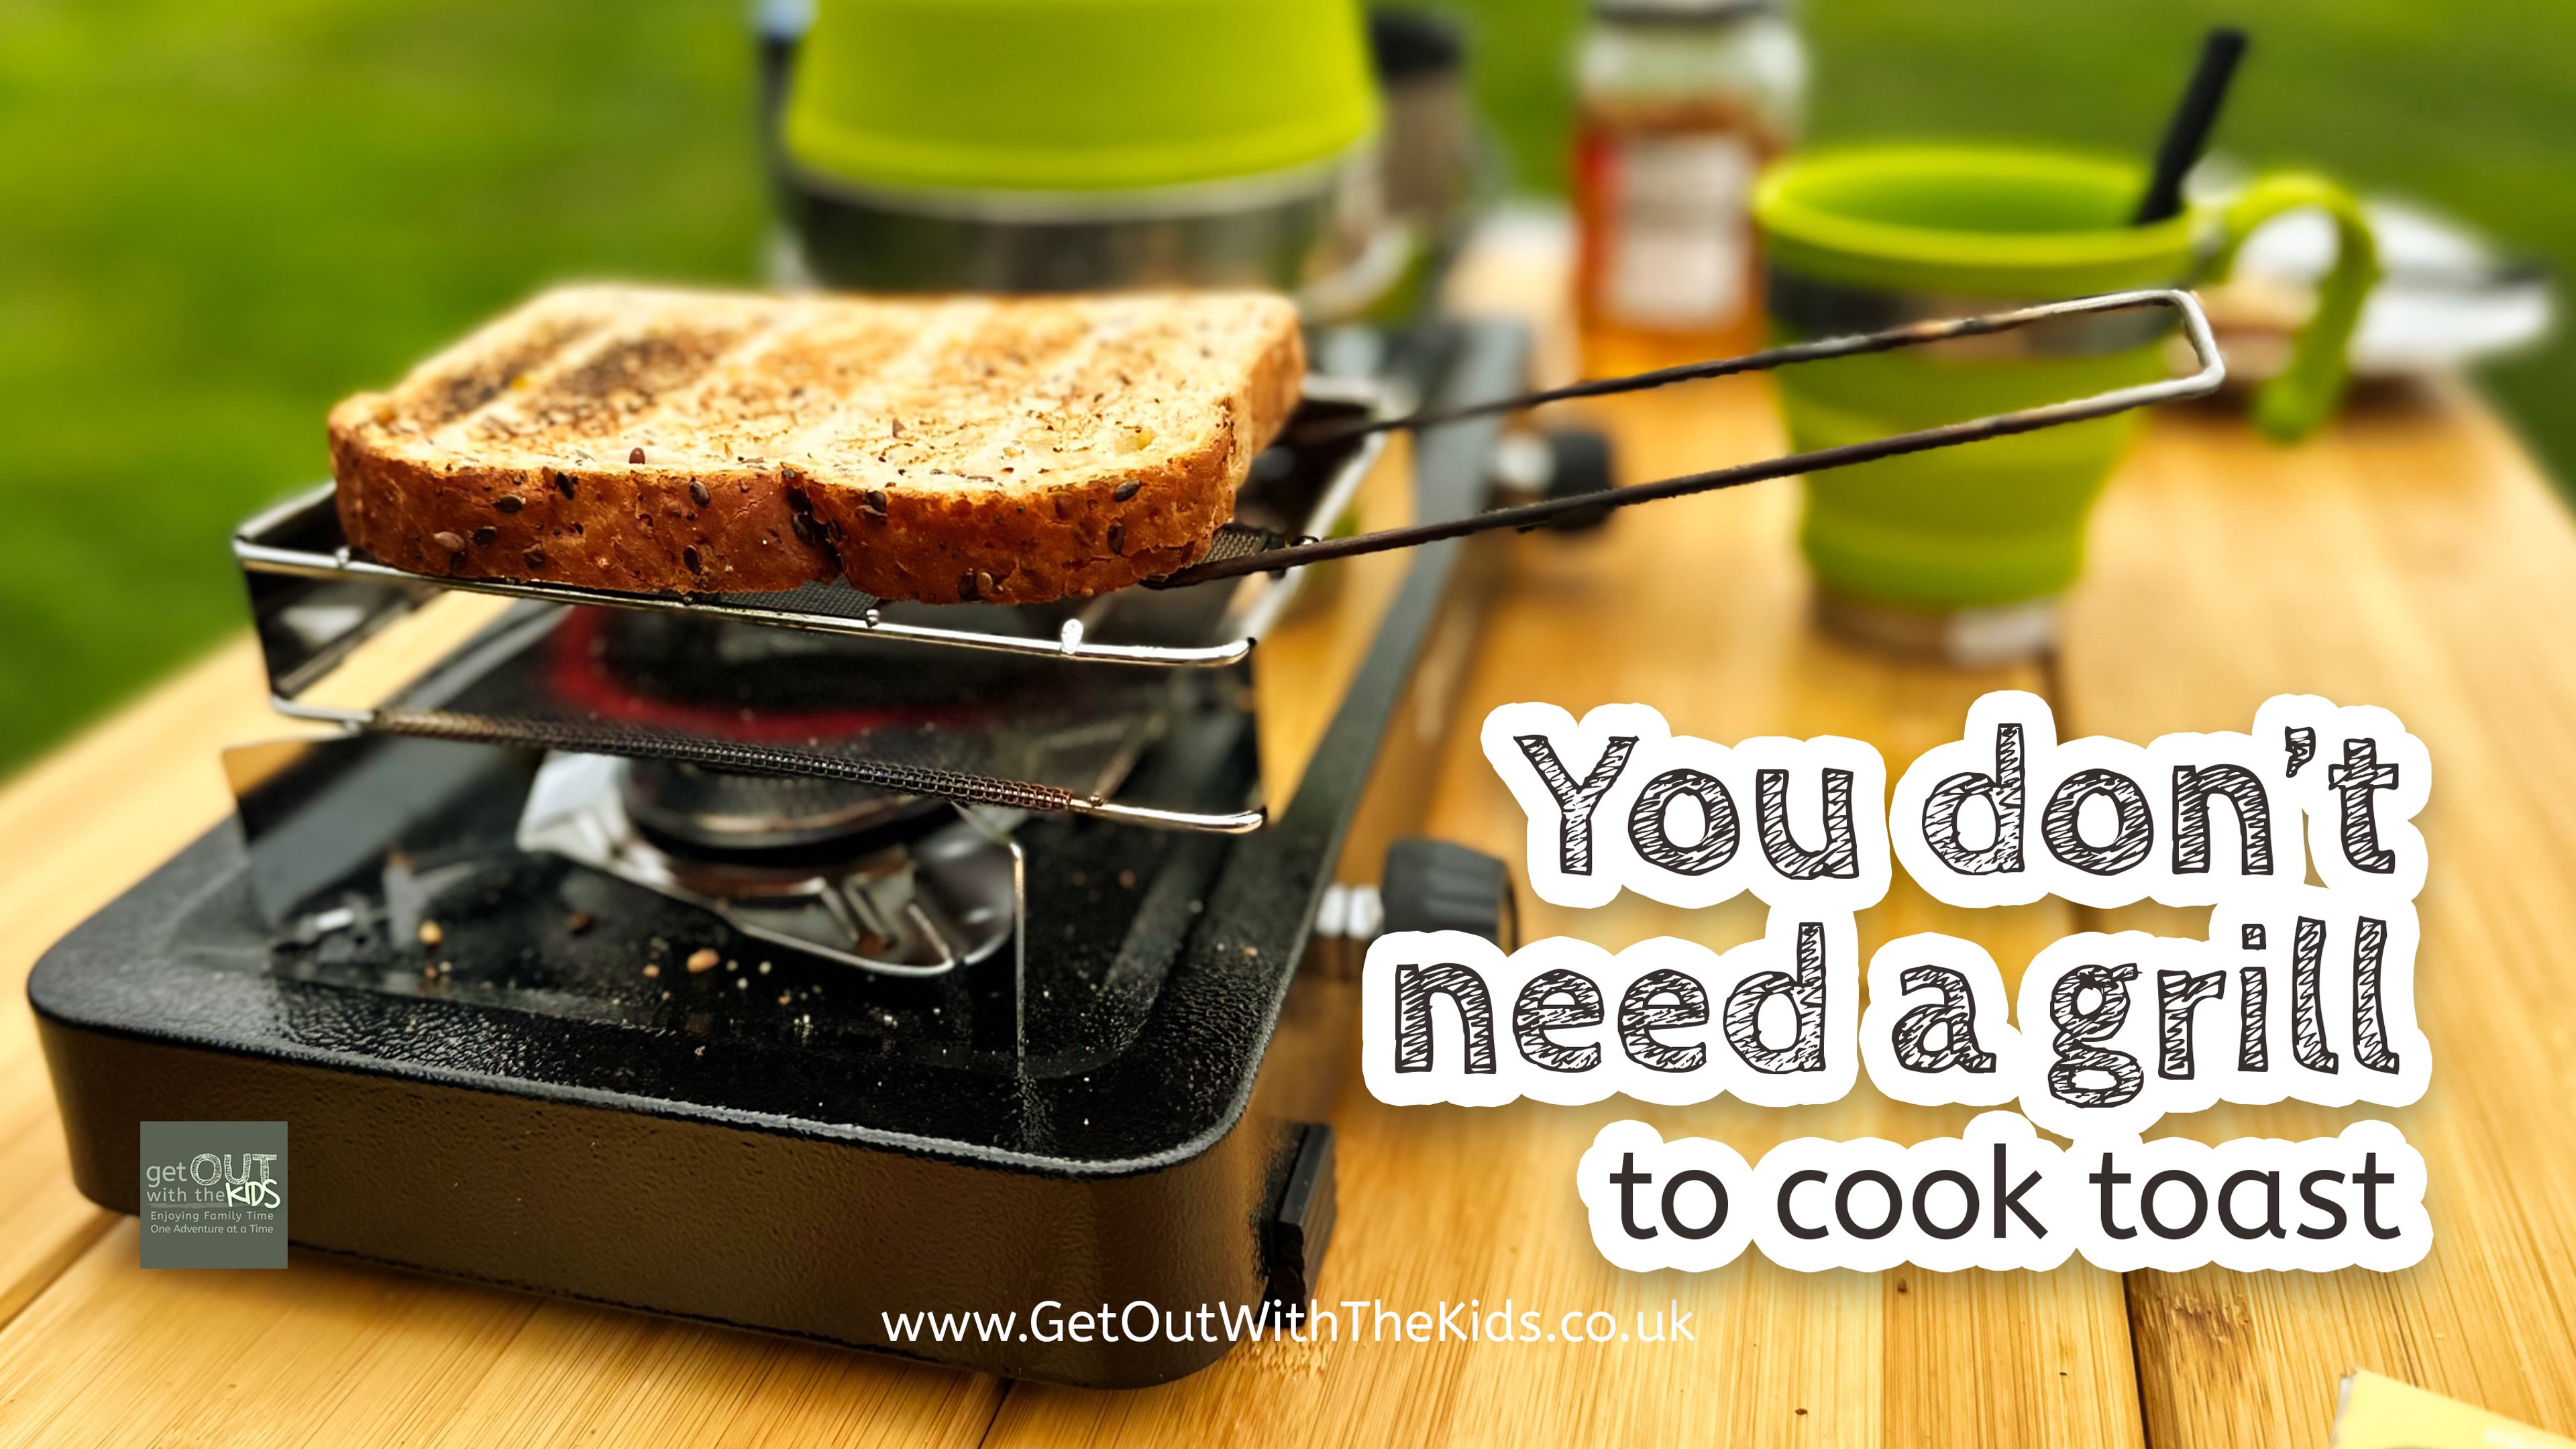 Cooking toast on a camping stove hob